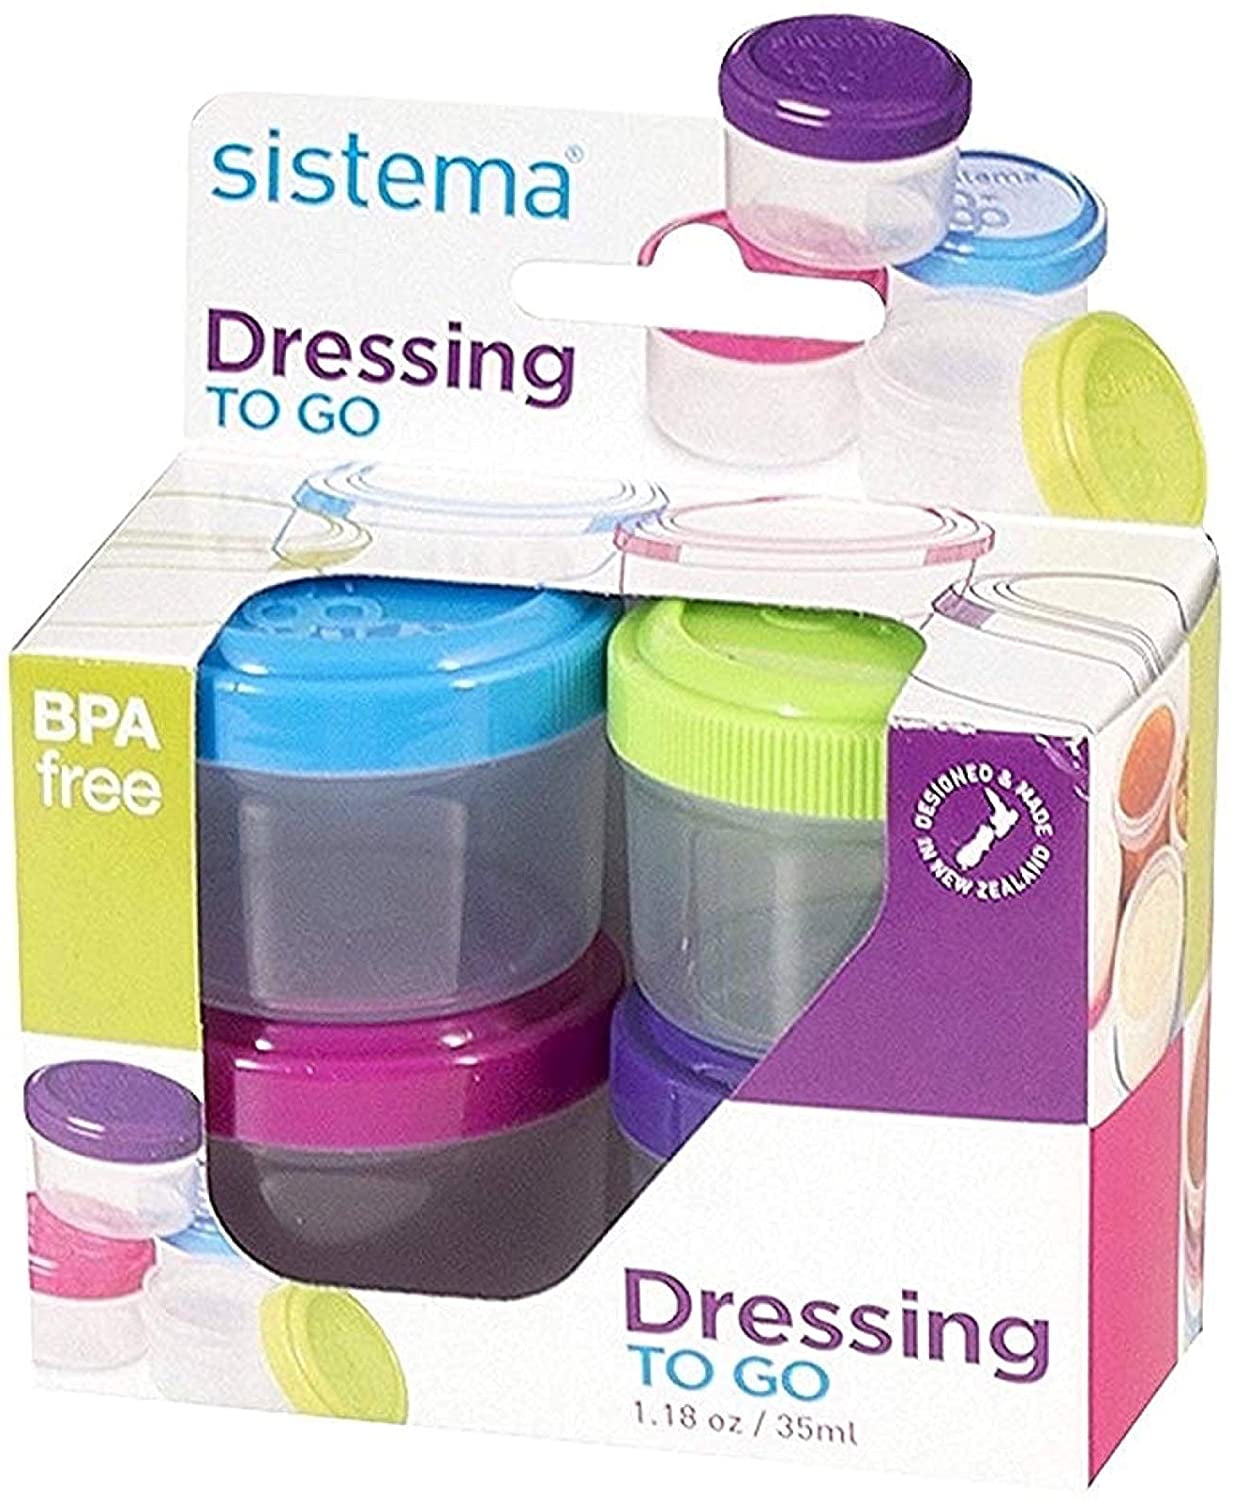 To Go Salad Dressing Containers